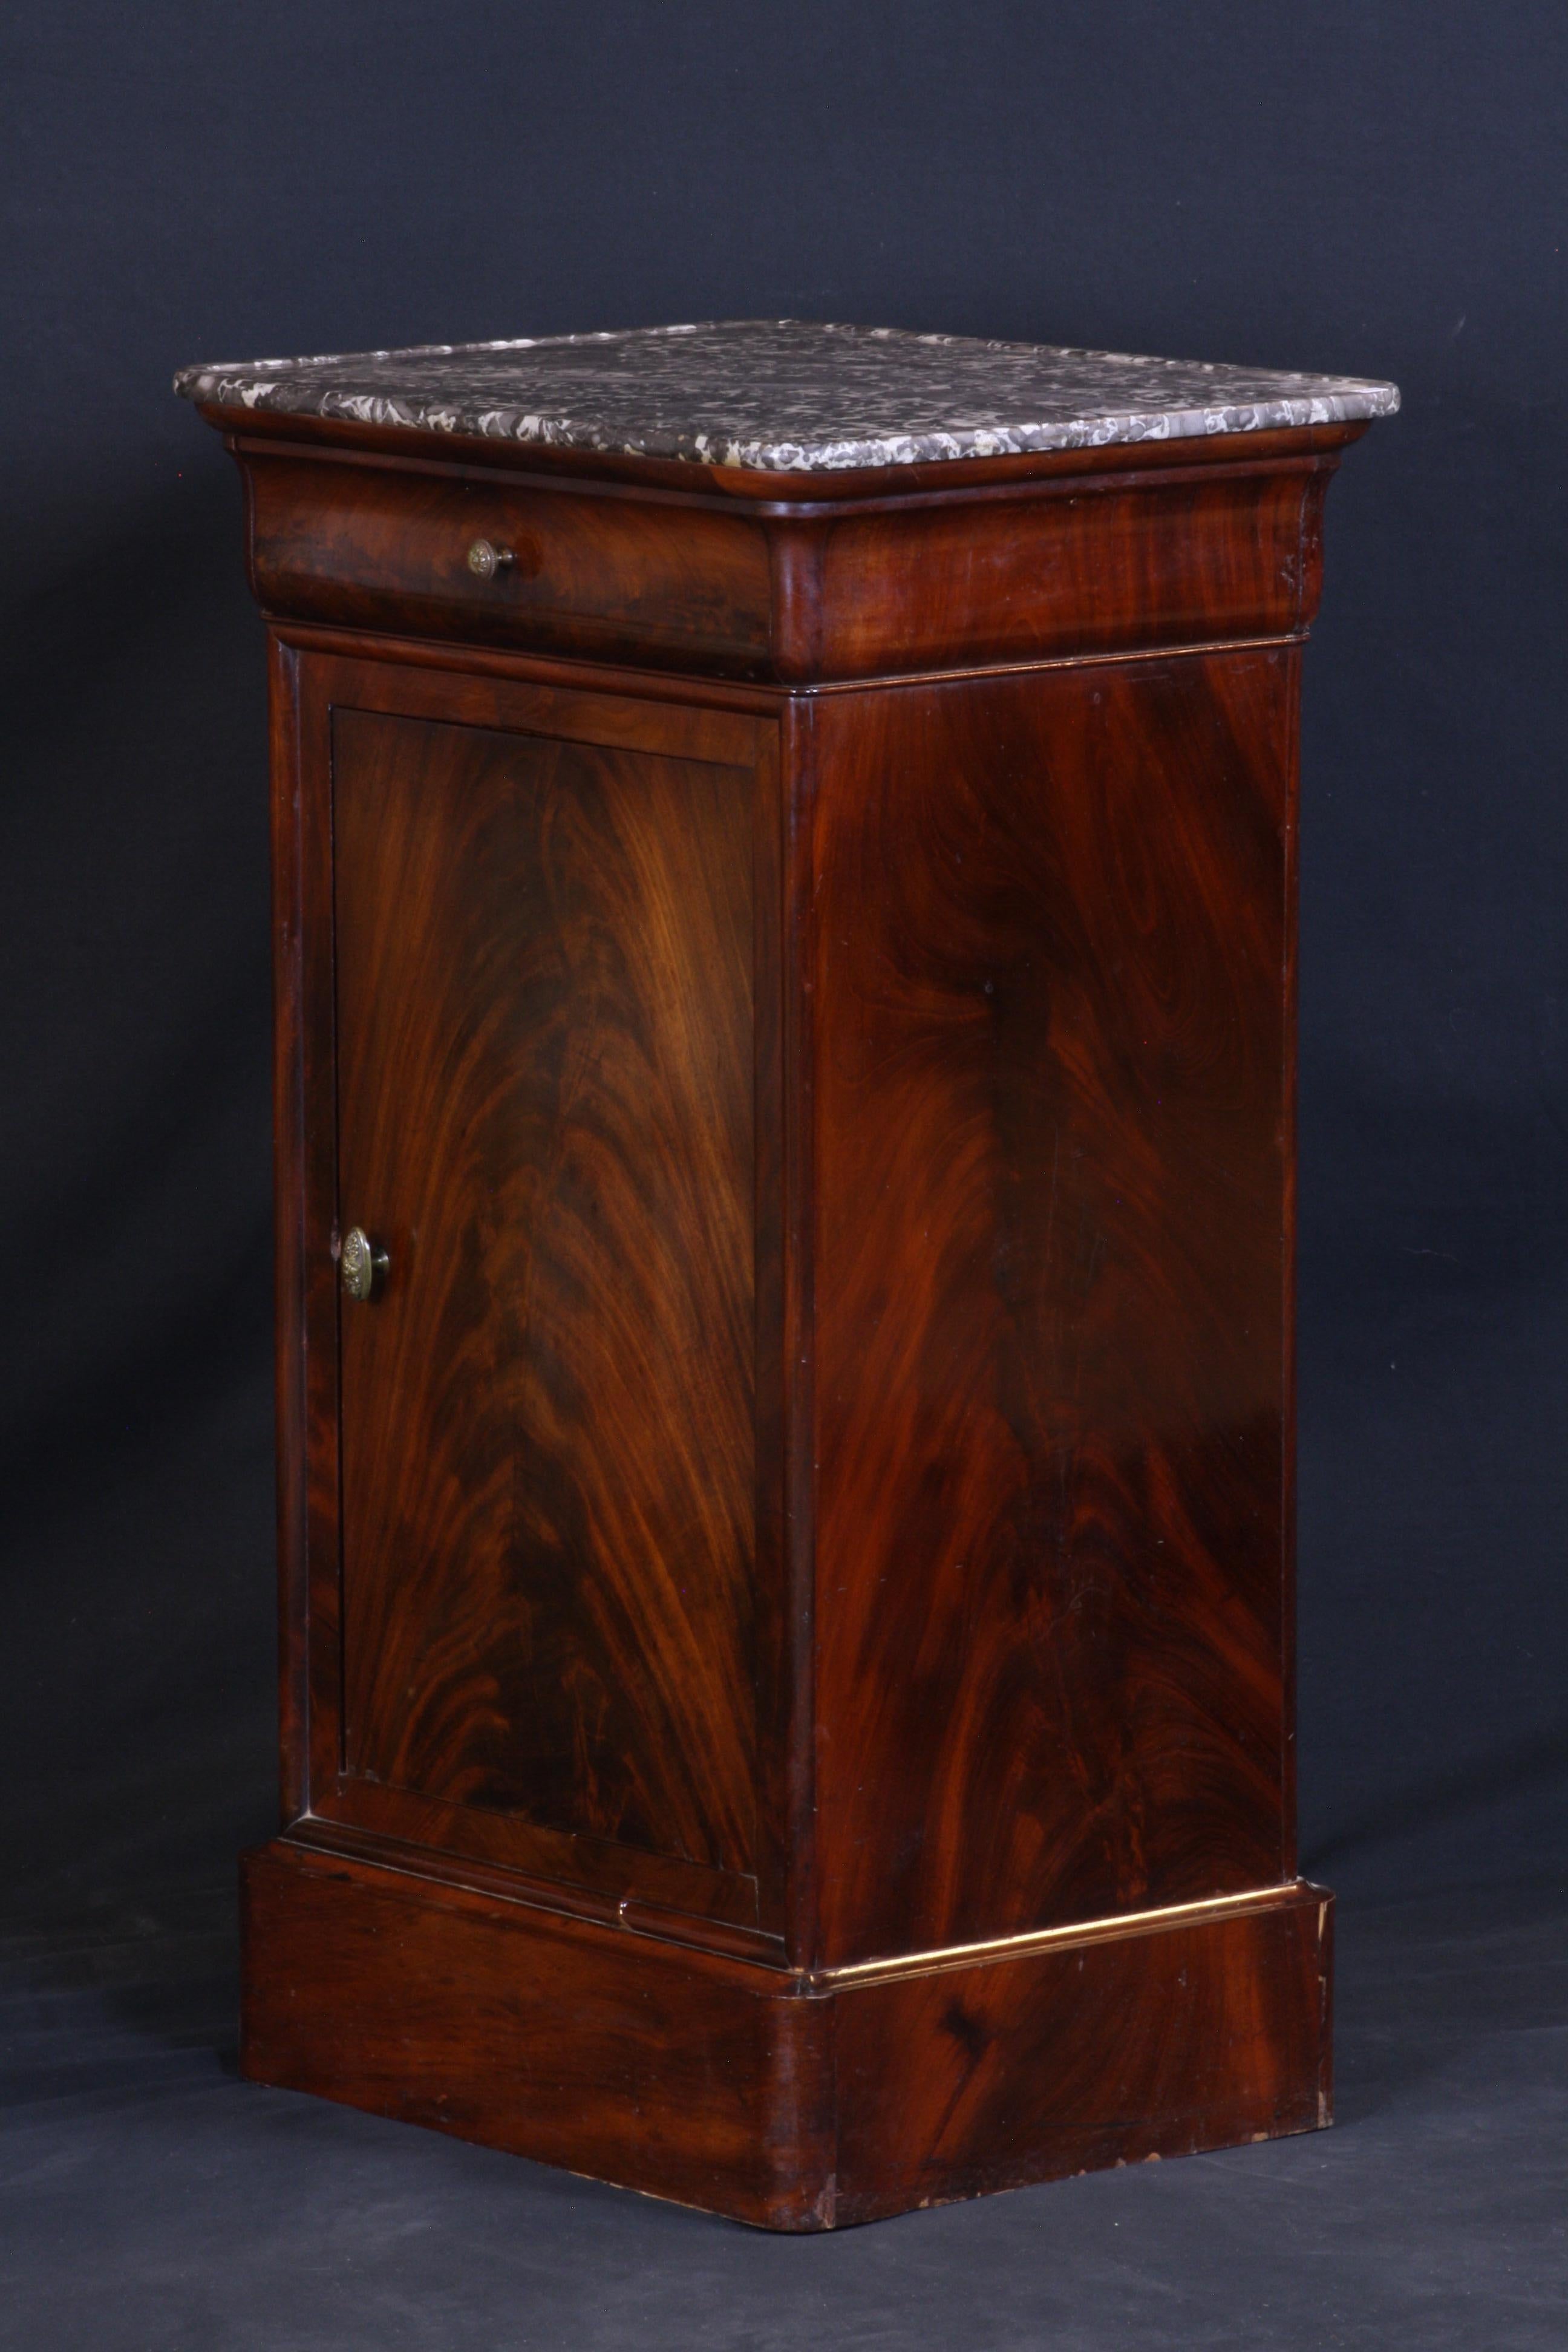 Marble-top mahogany night table/bedside table, French with flamed mahogany and 1 drawer and door.